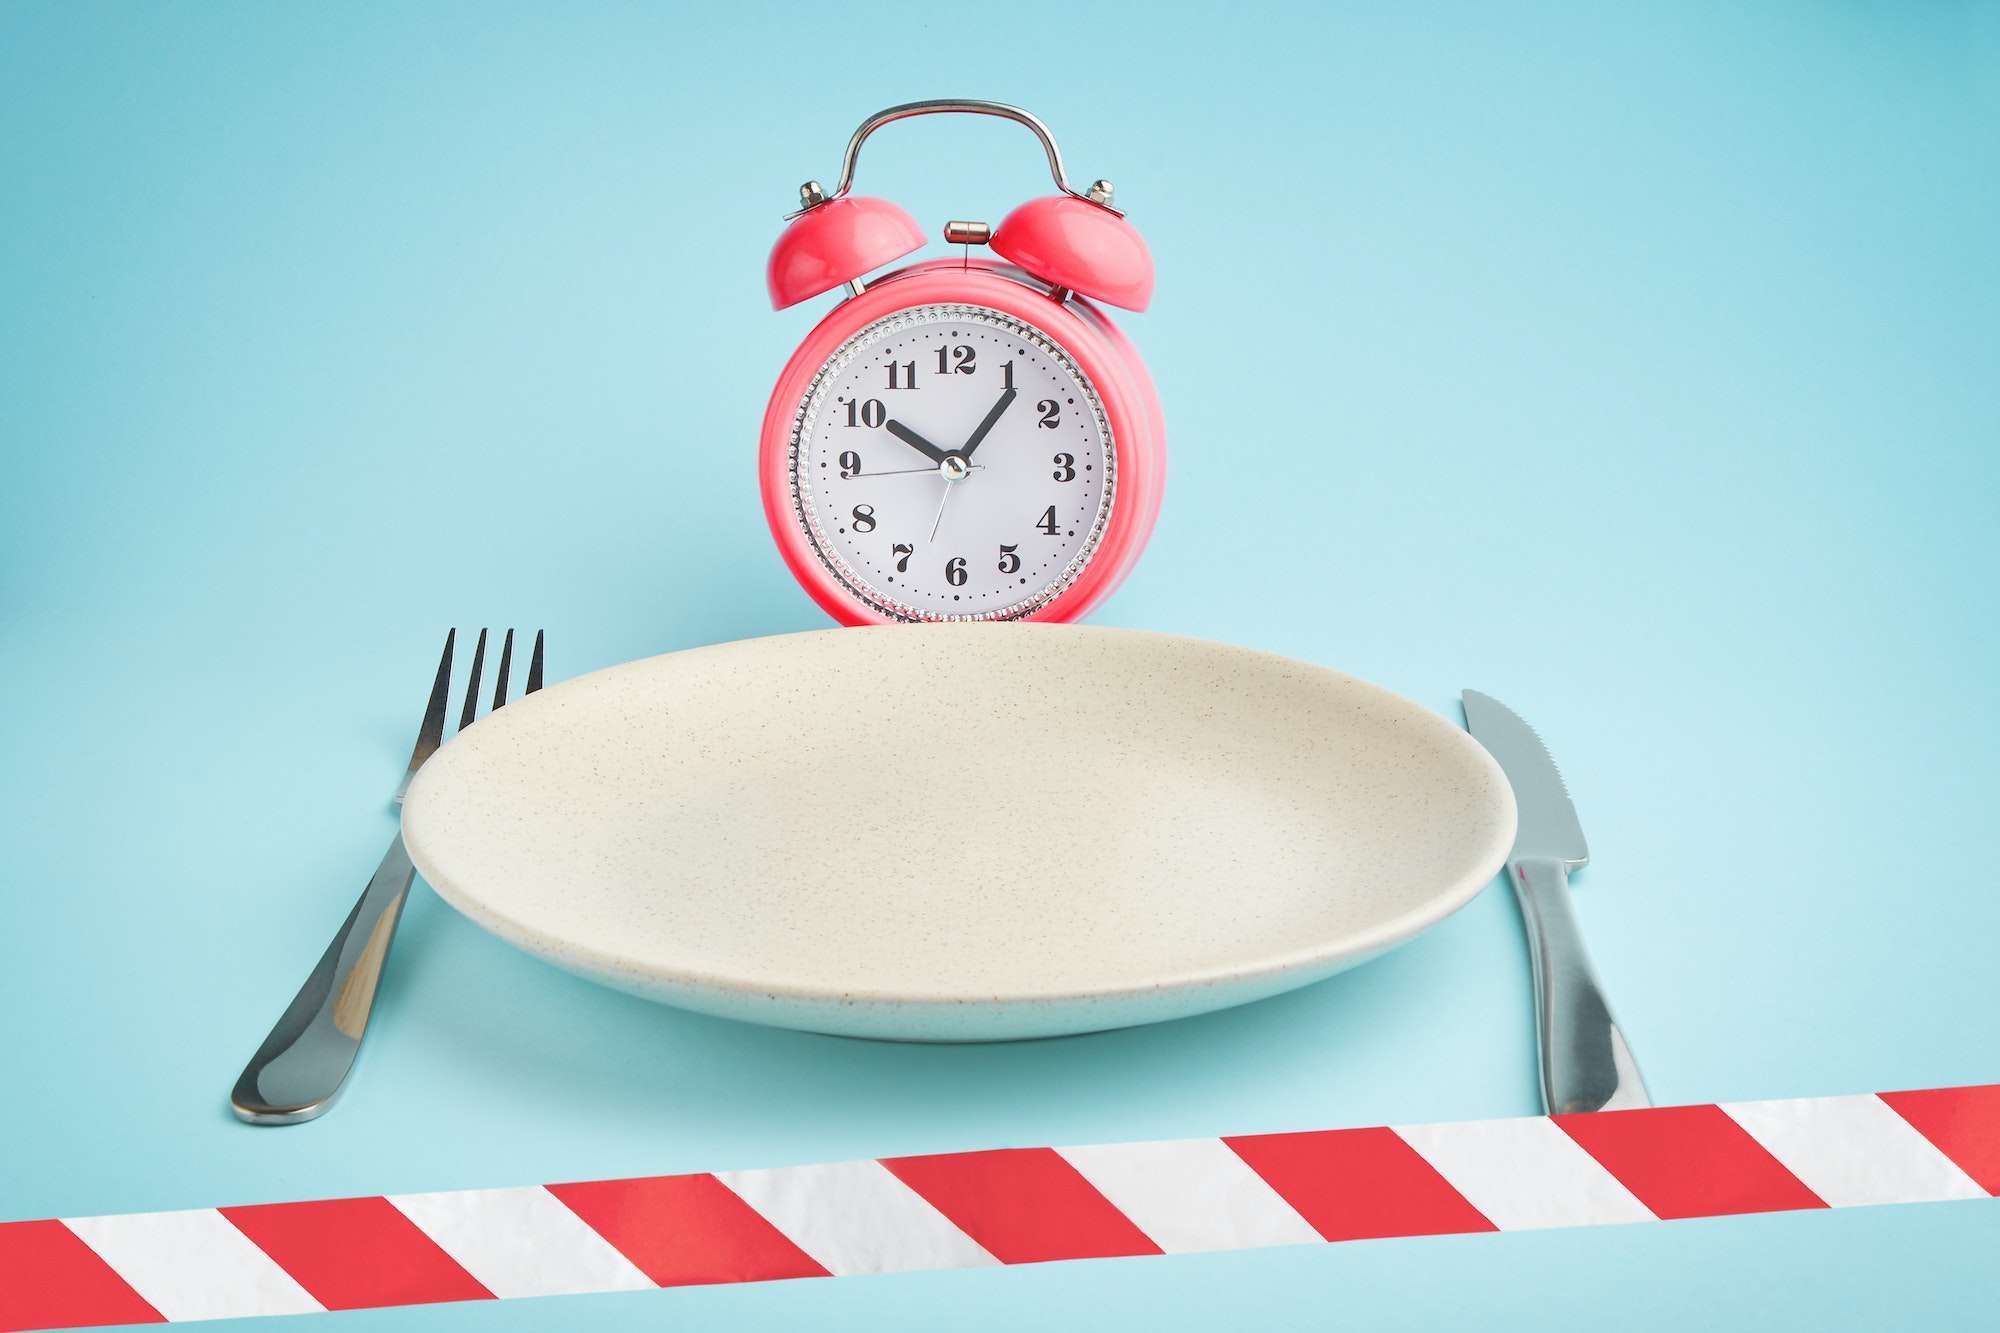 Alarm clock, plate and barrier tape. intermittent fasting, lunchtime, diet and weight loss